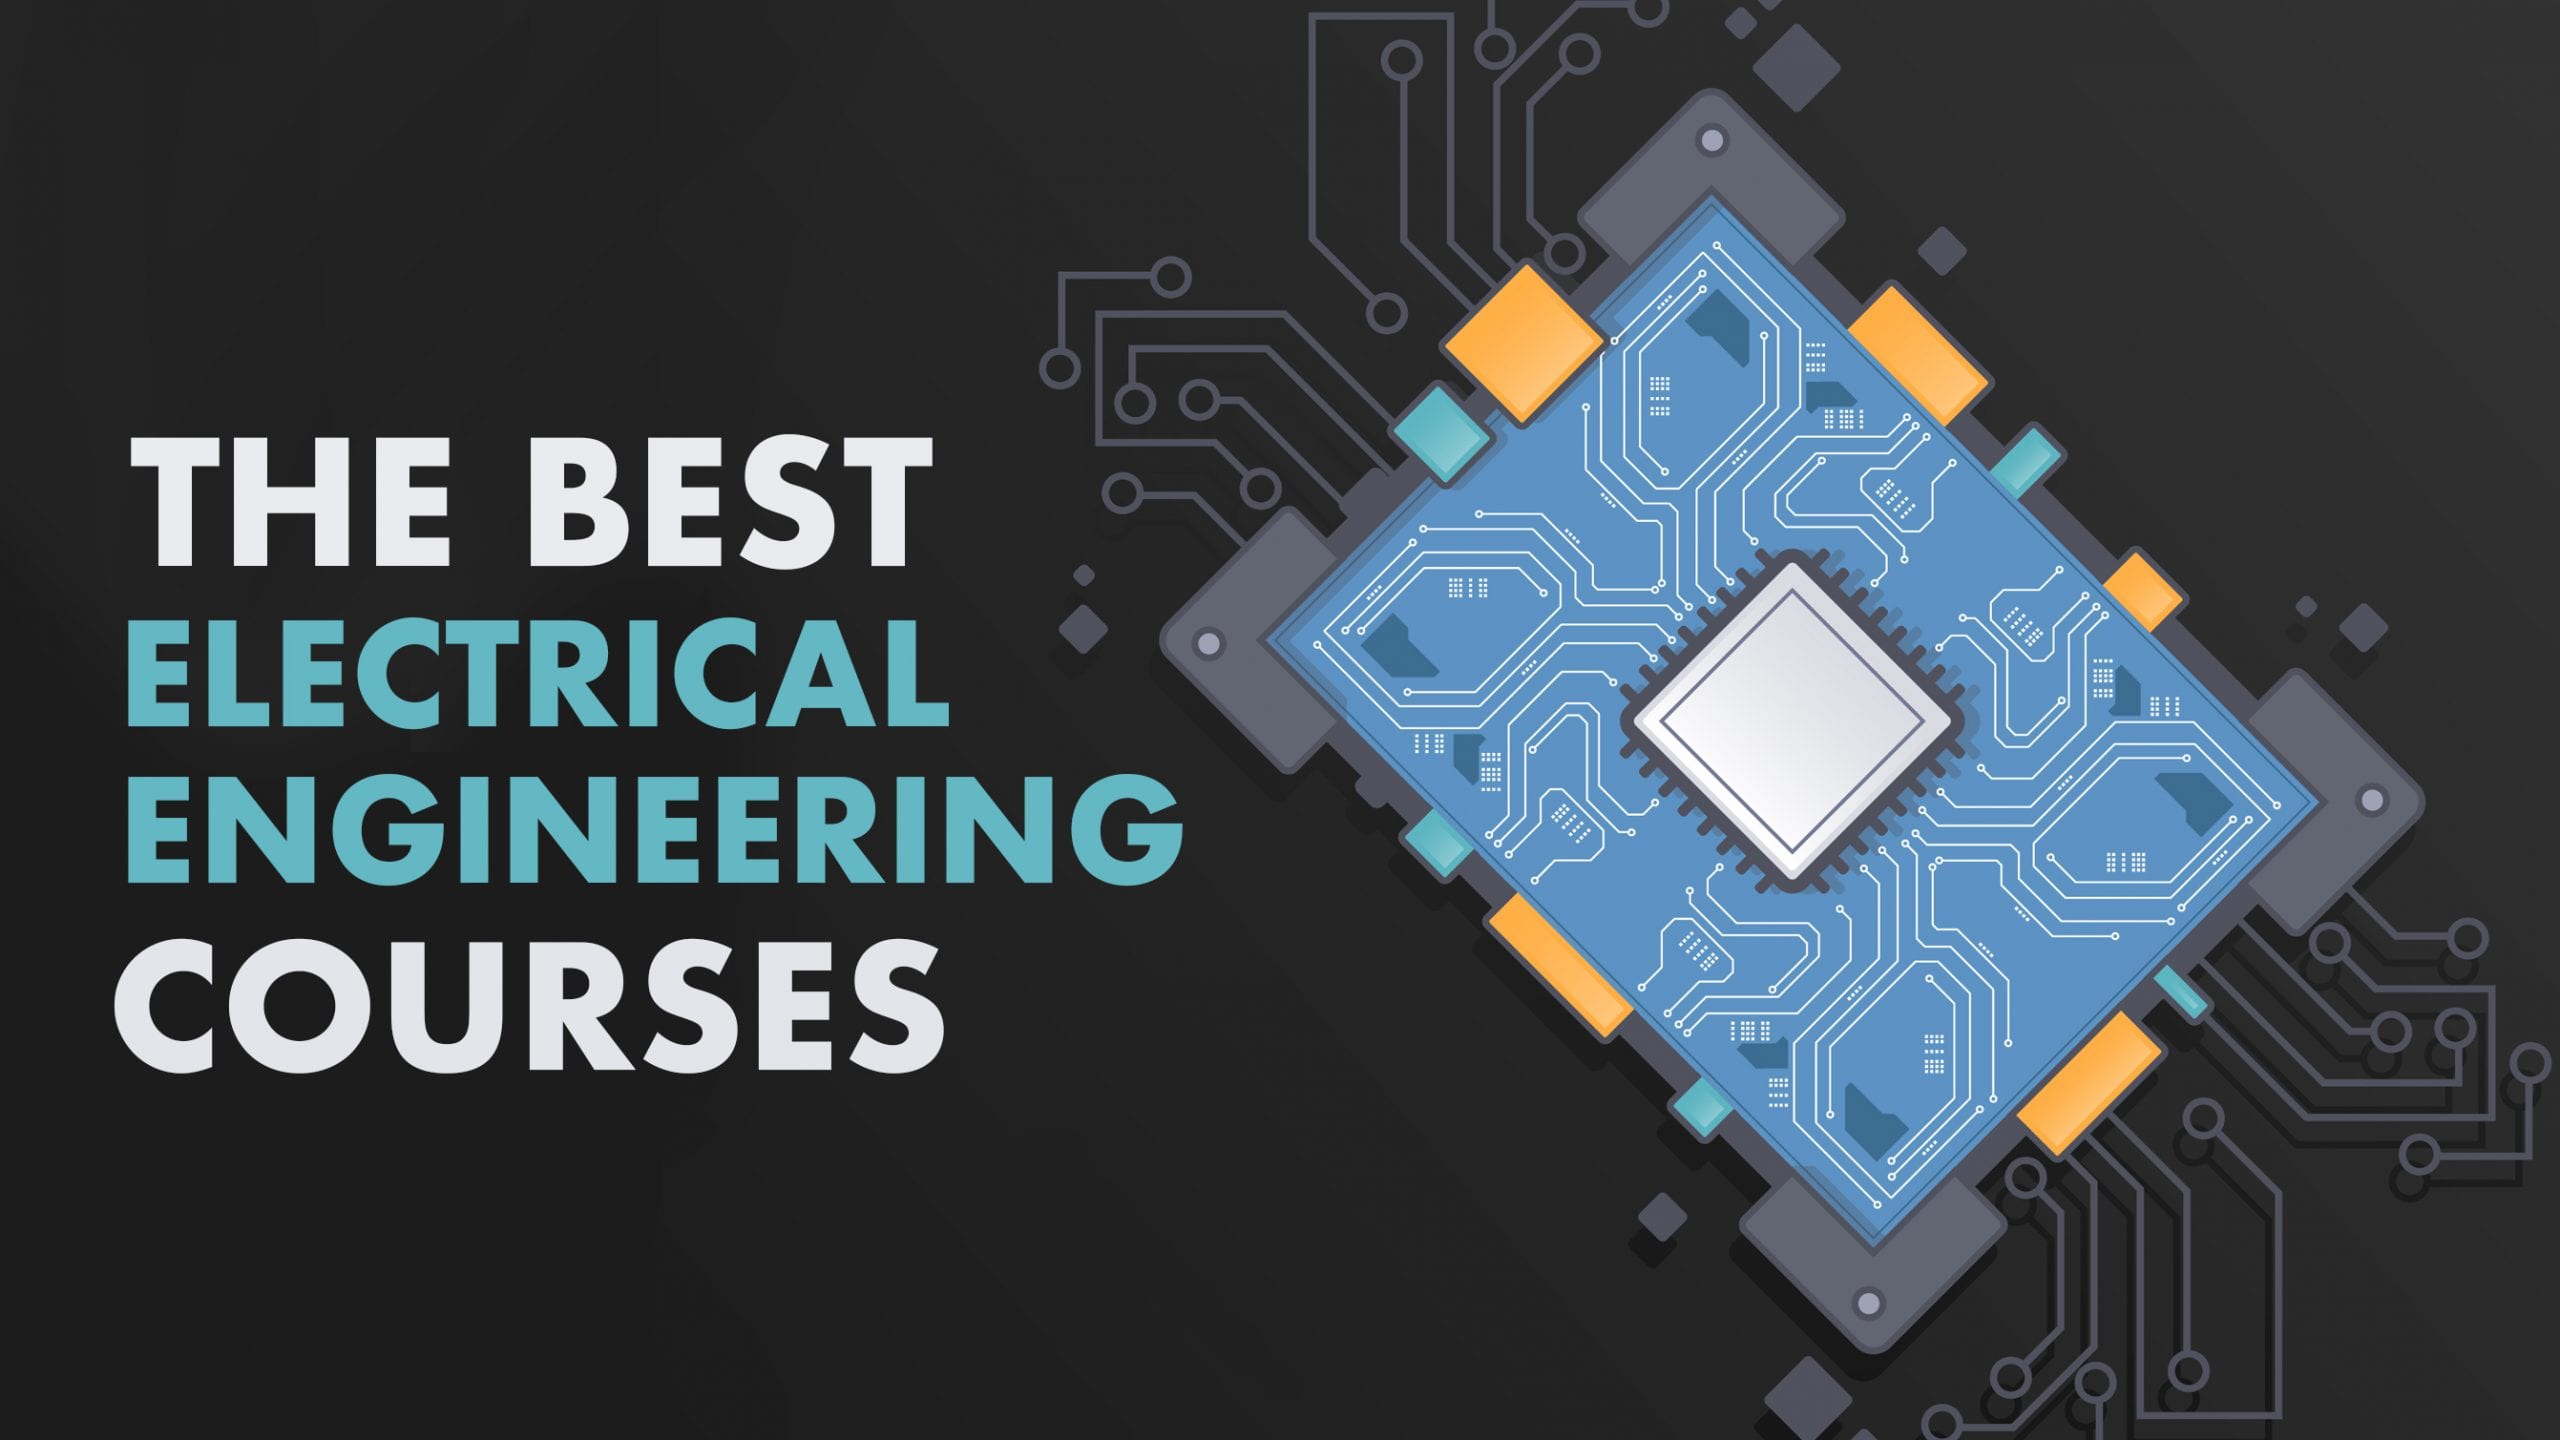 6 Best Electrical Engineering Courses, Classes and Trainings with